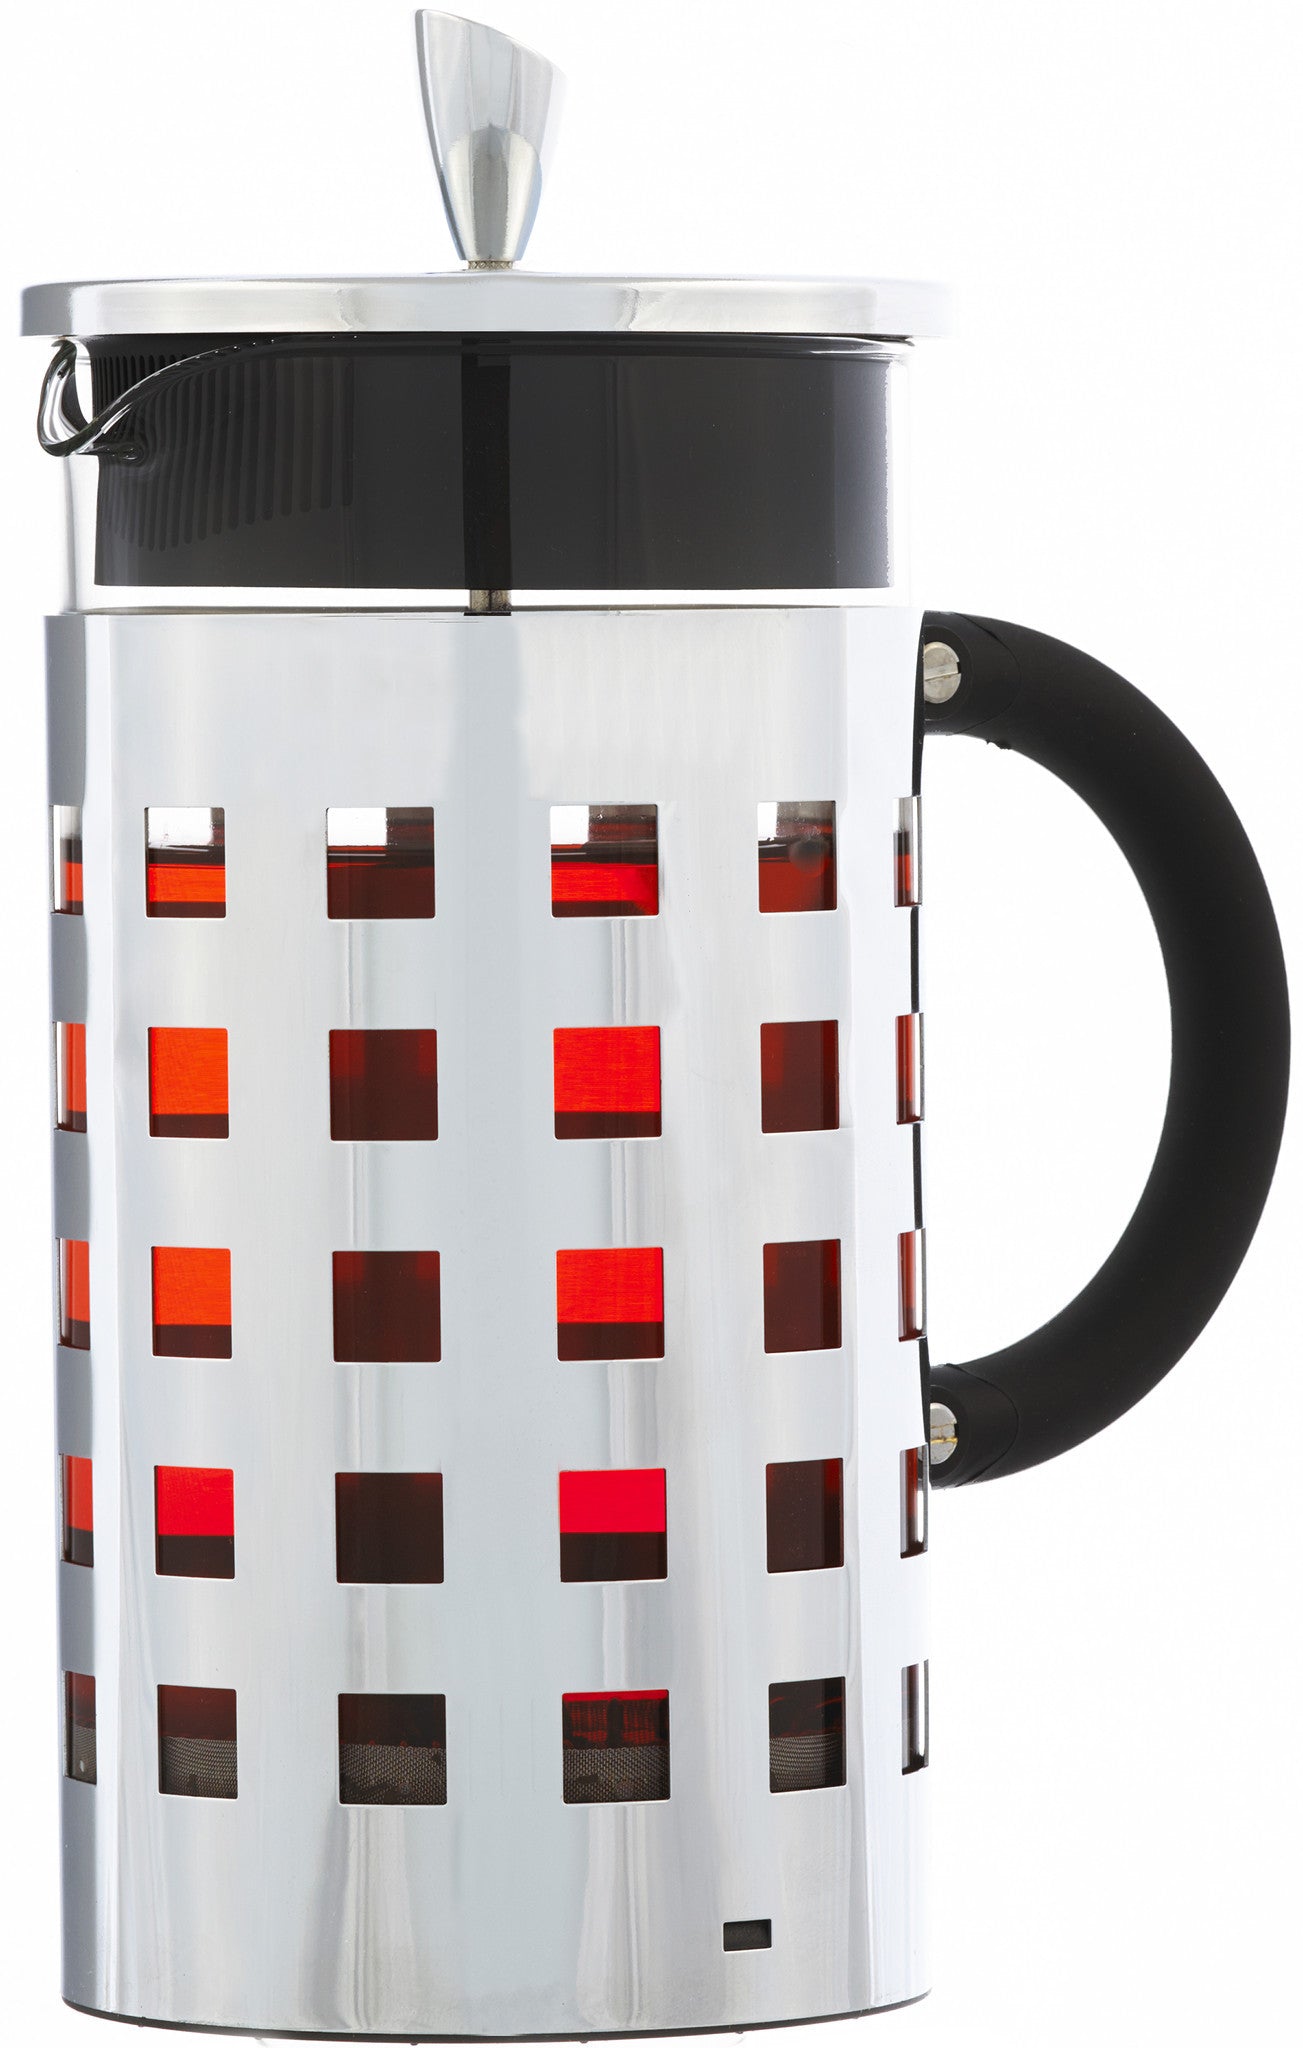 Bodum Eileen 8 cup French Press Coffee Maker